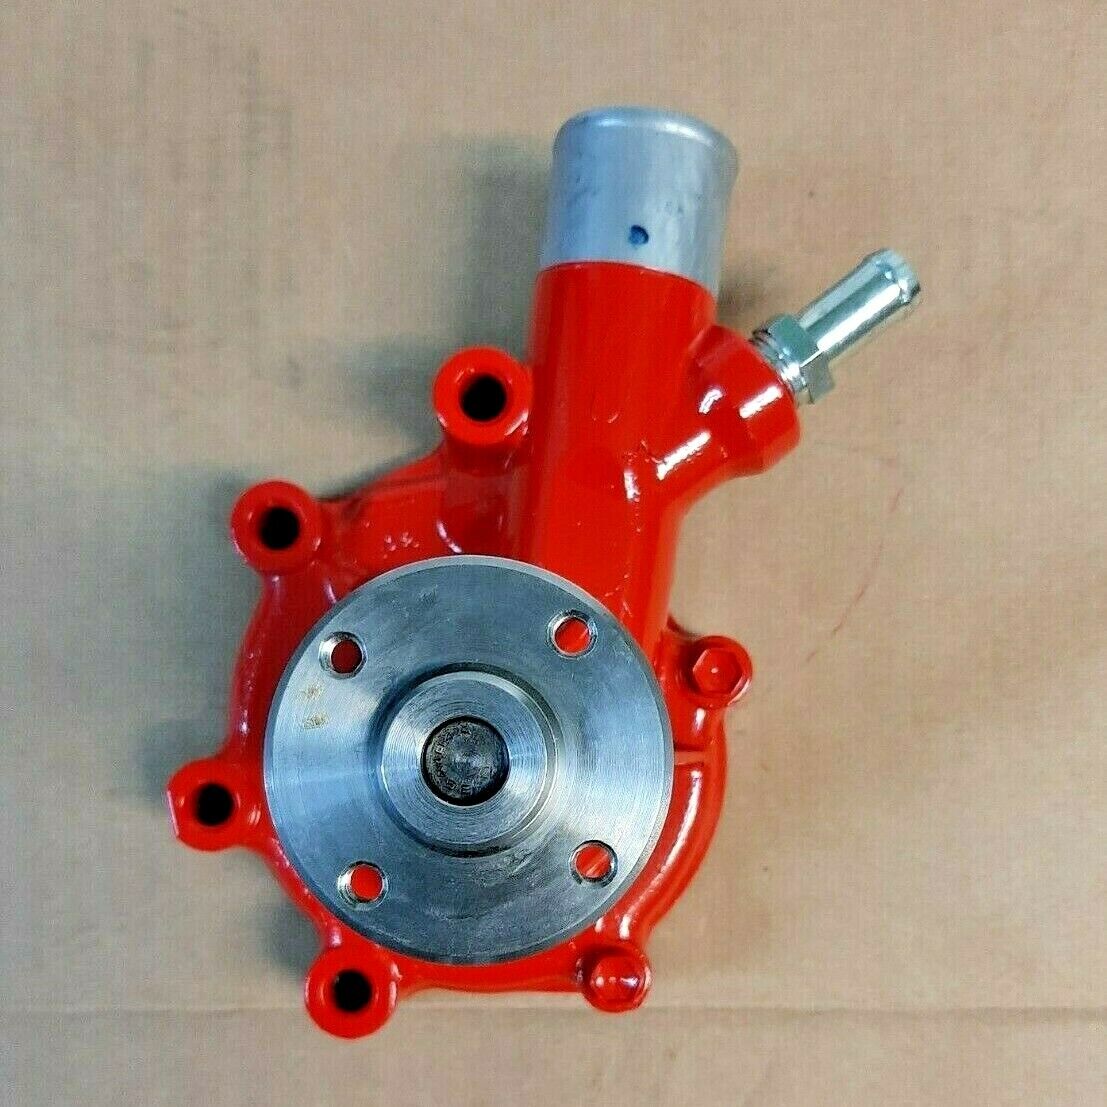 WESTERBEKE FRESH WATER PUMP #030473 / 045231 NEW ... WITH GASKET...FREE SHIPPING